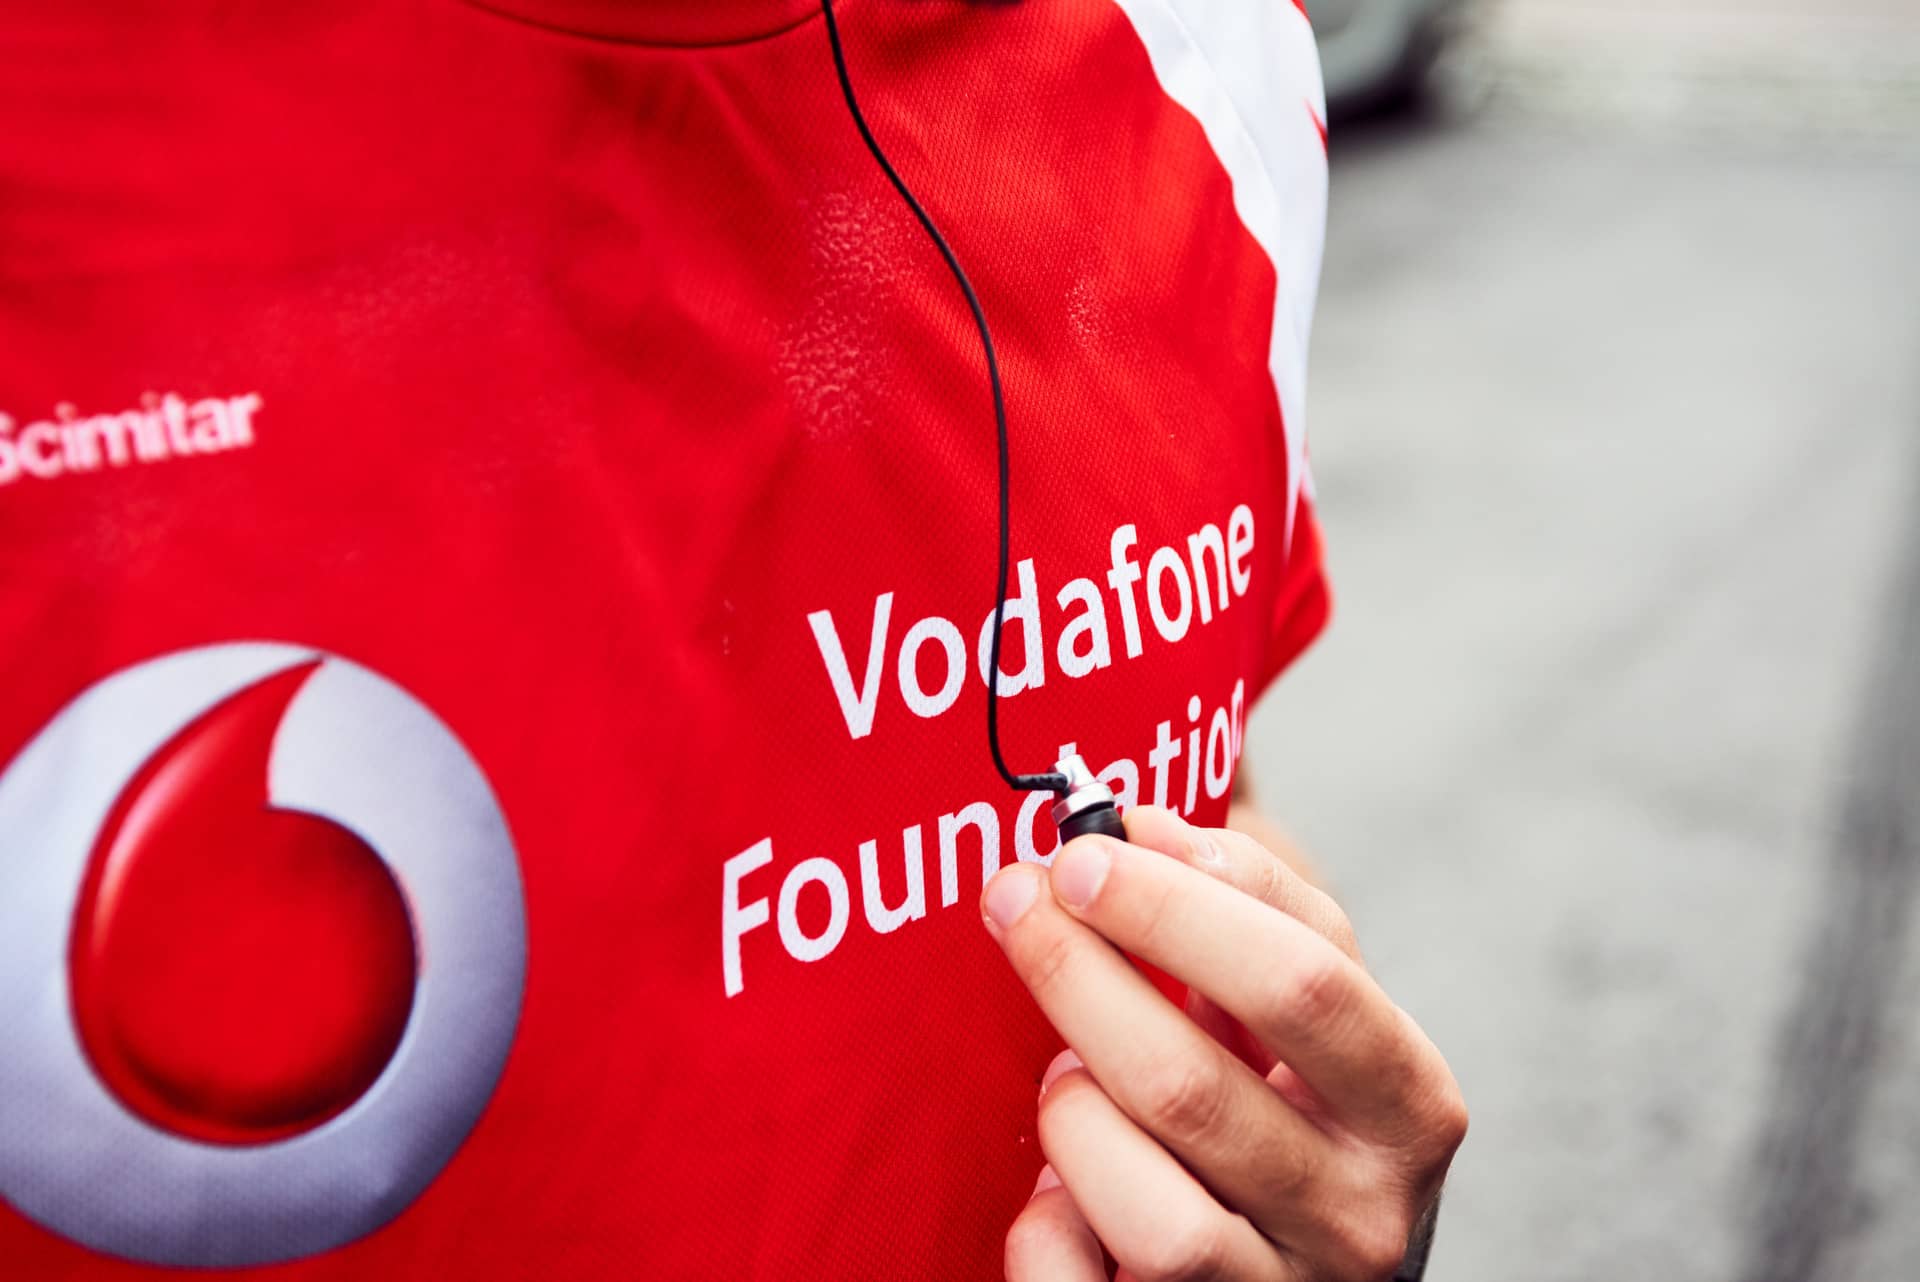 A man on a run outside with a Vodafone Foundation top on